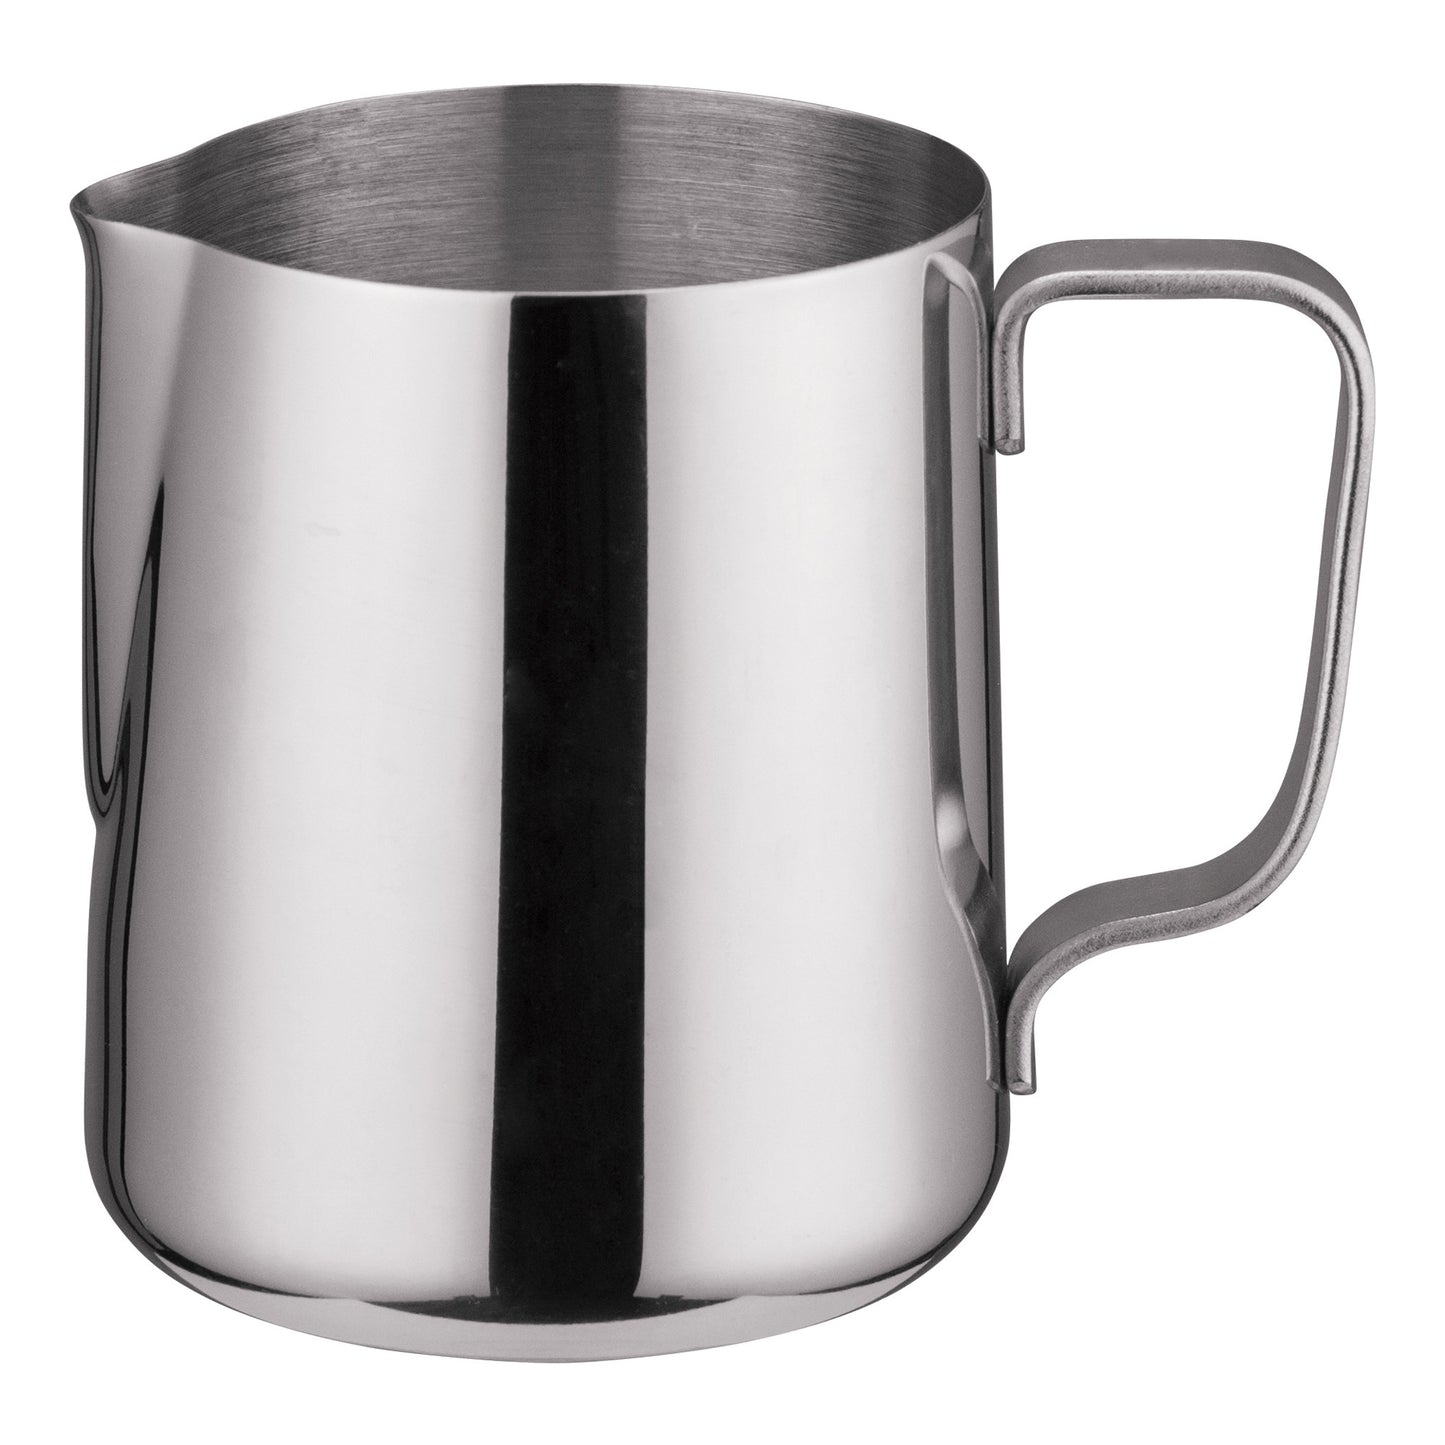 WP-20 - Frothing Pitcher, Stainless Steel - 20 oz